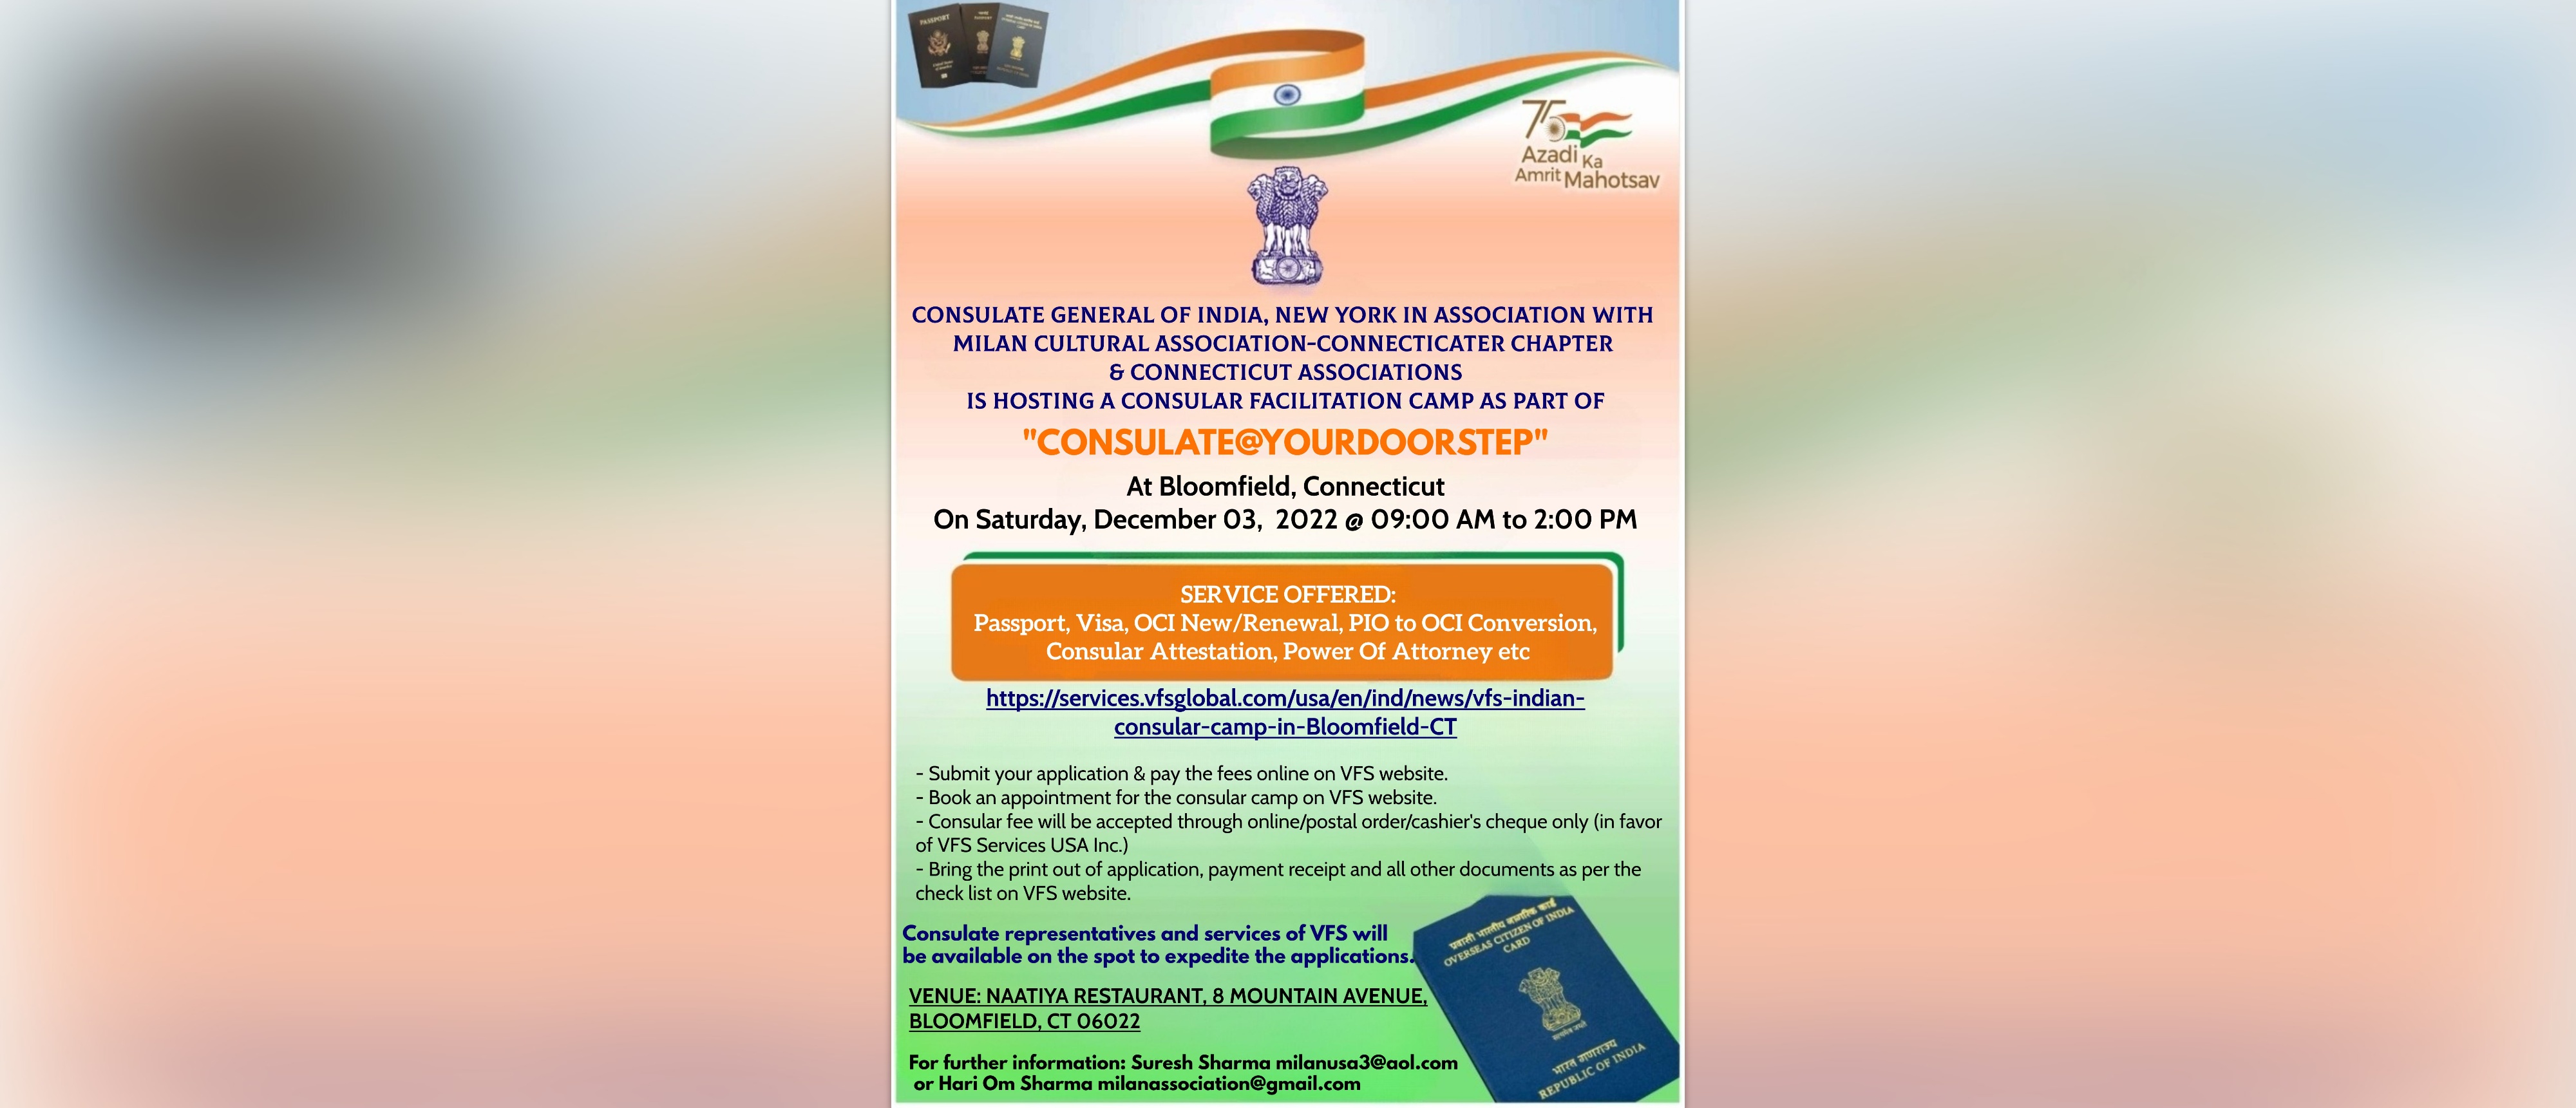  Consular Facilitation Camp at Bloomfield, Connecticut on December 03, 2022